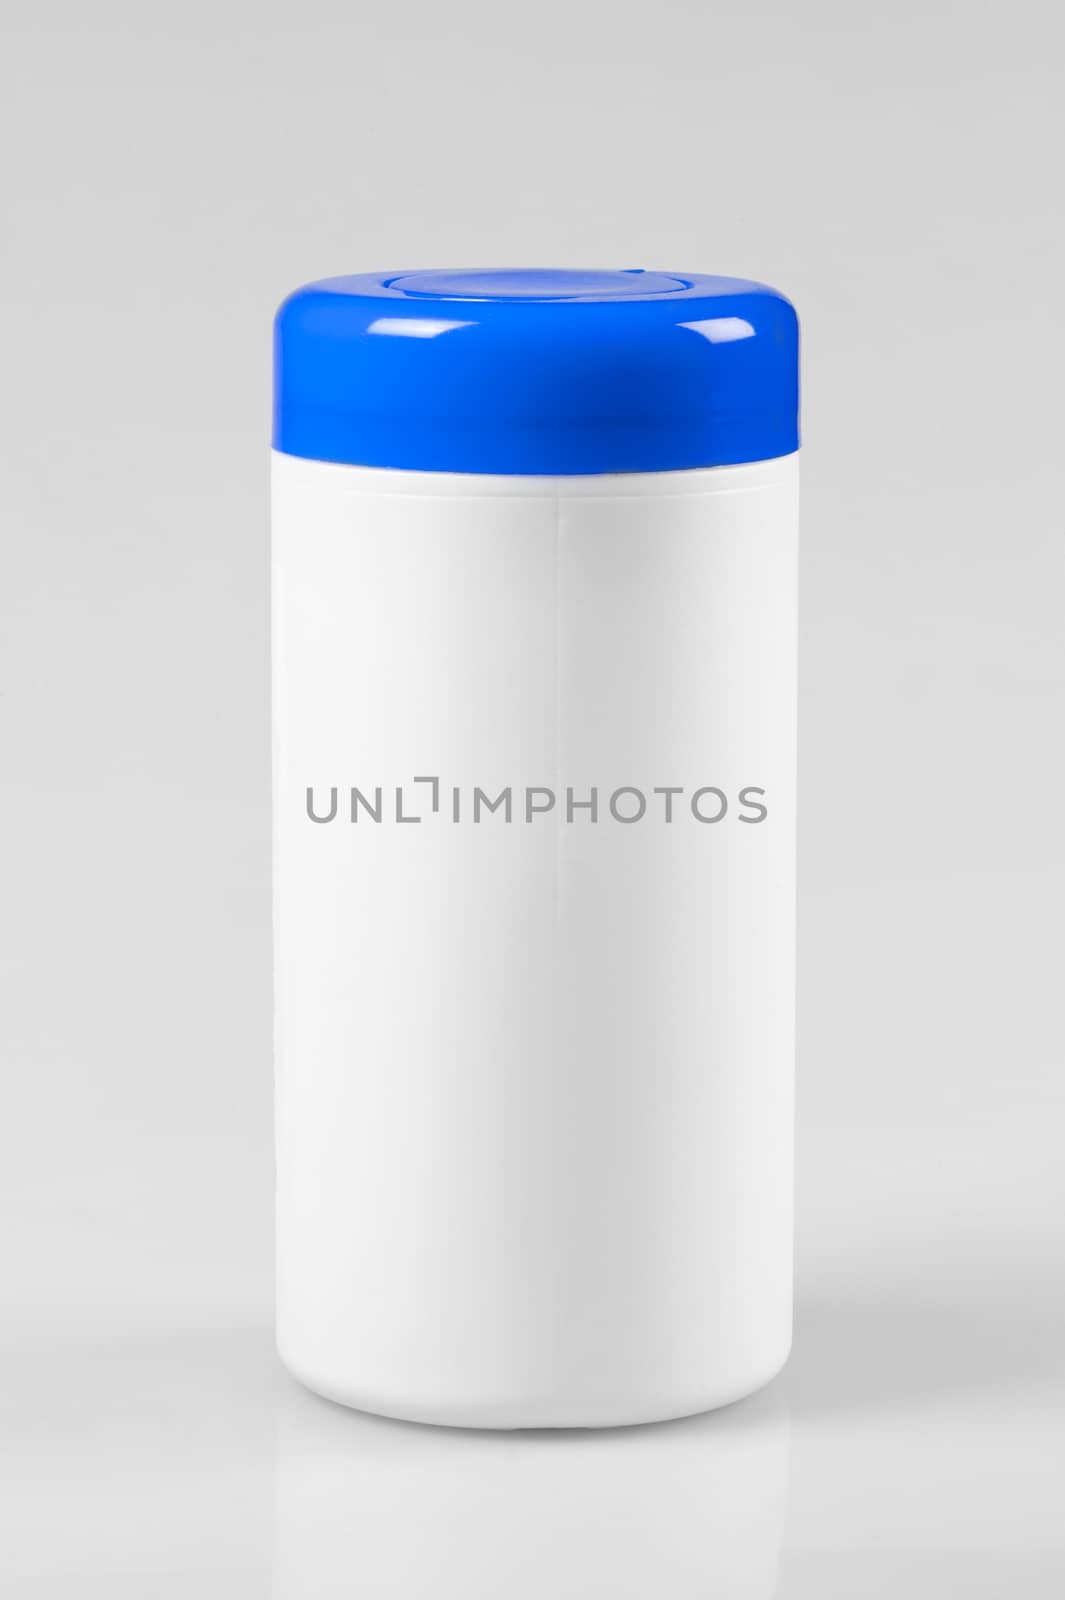 White plastic container with a blue lid on white background